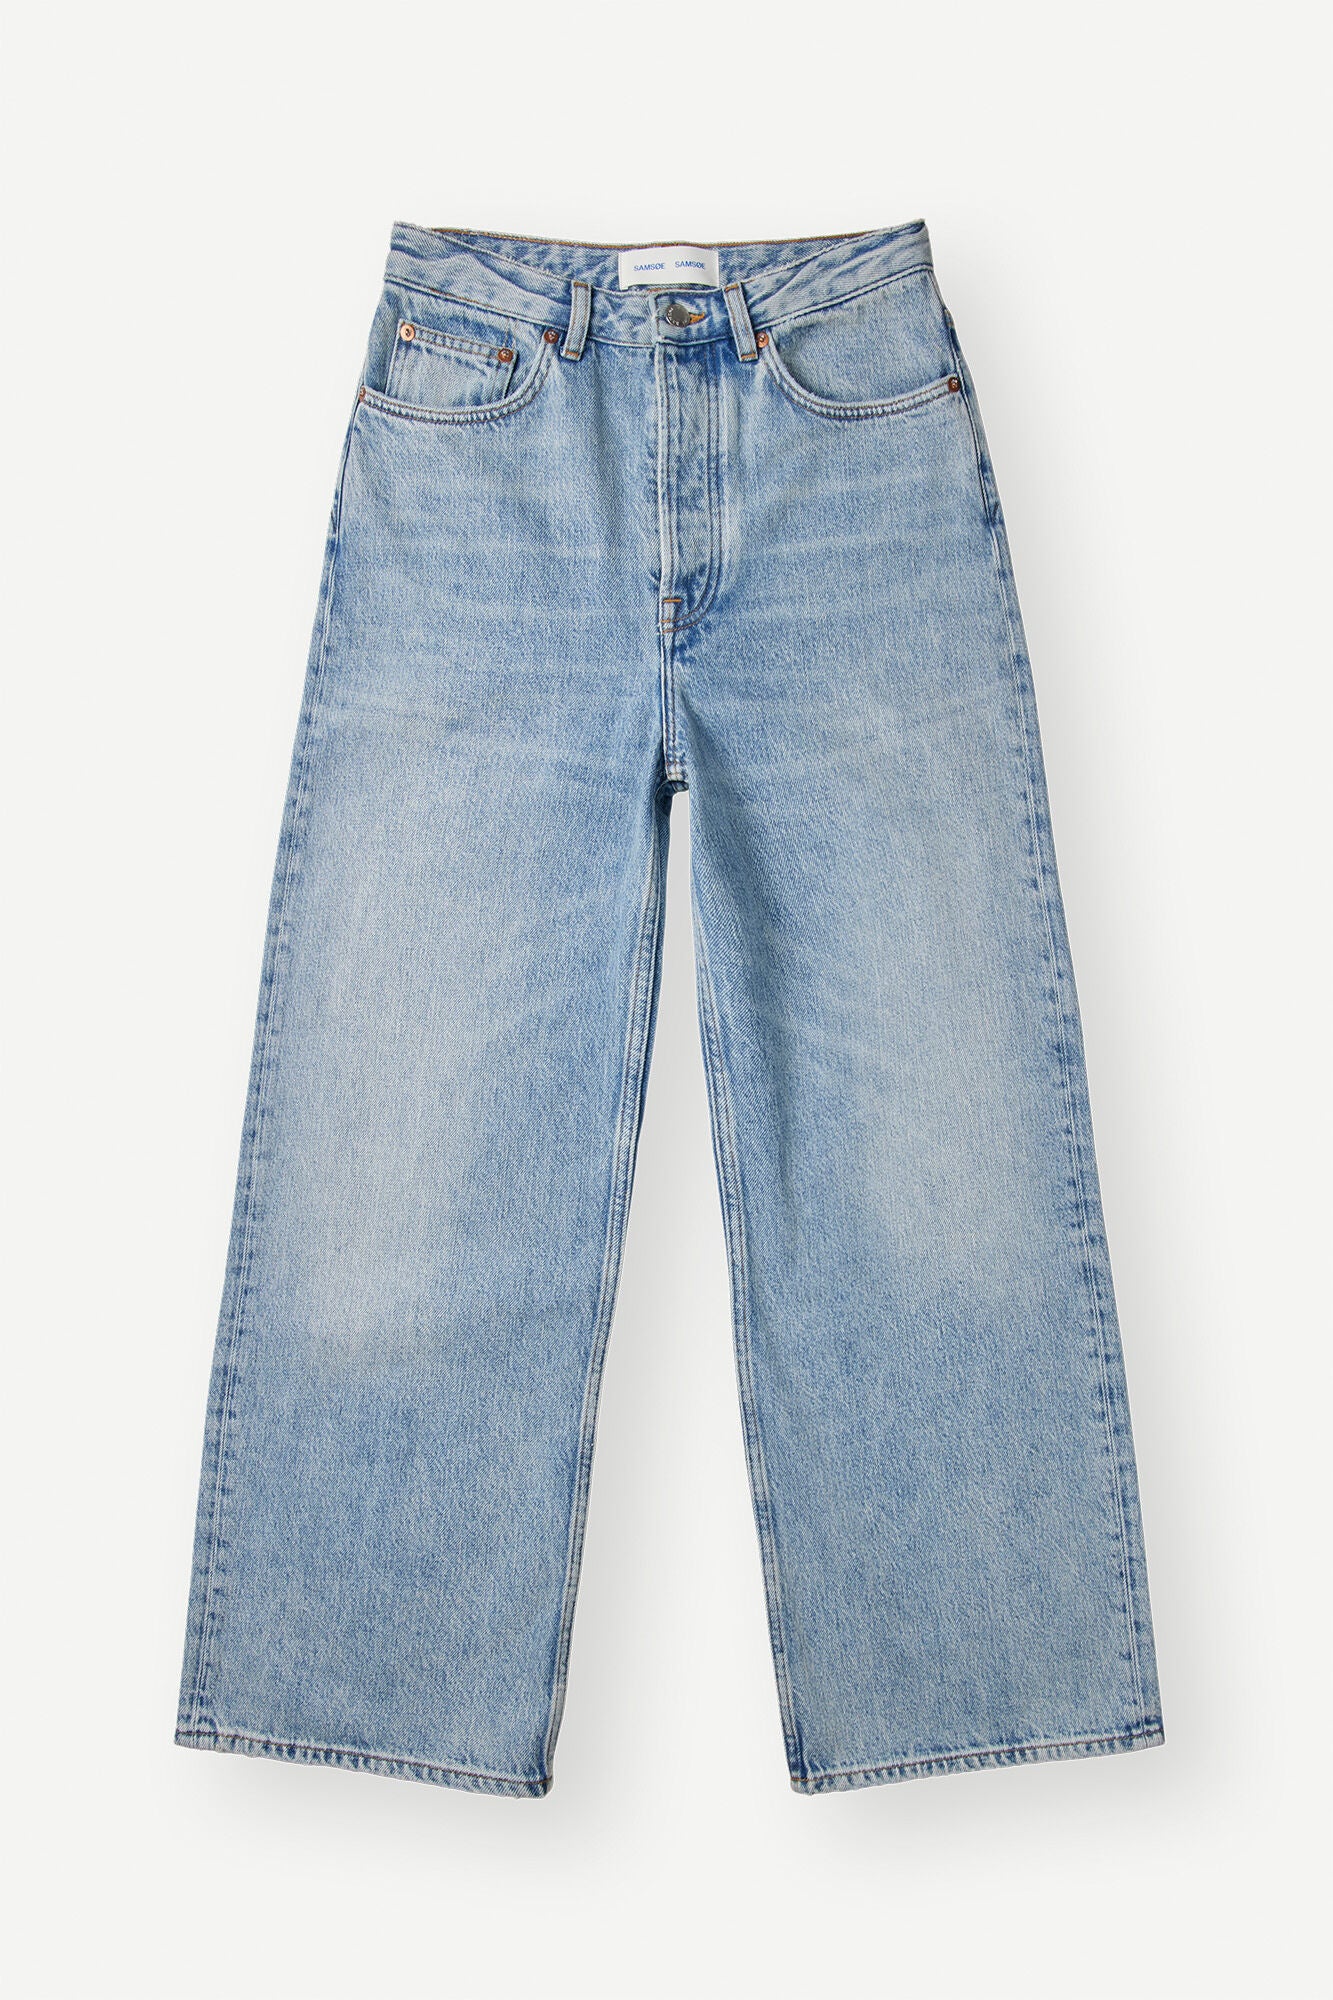 Shelly Jeans Light Heritage